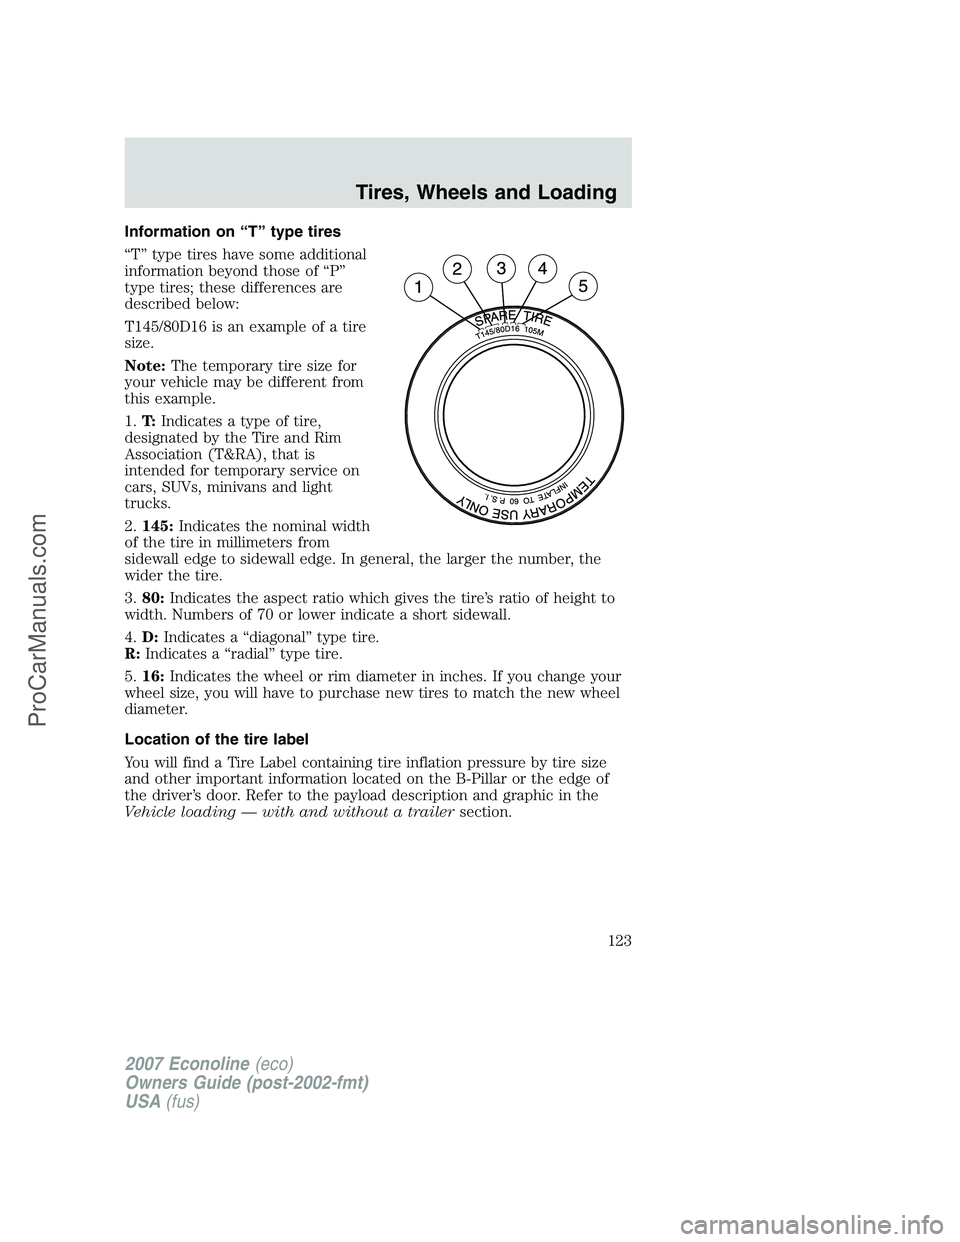 FORD ECONOLINE 2007  Owners Manual Information on “T” type tires
“T” type tires have some additional
information beyond those of “P”
type tires; these differences are
described below:
T145/80D16 is an example of a tire
size